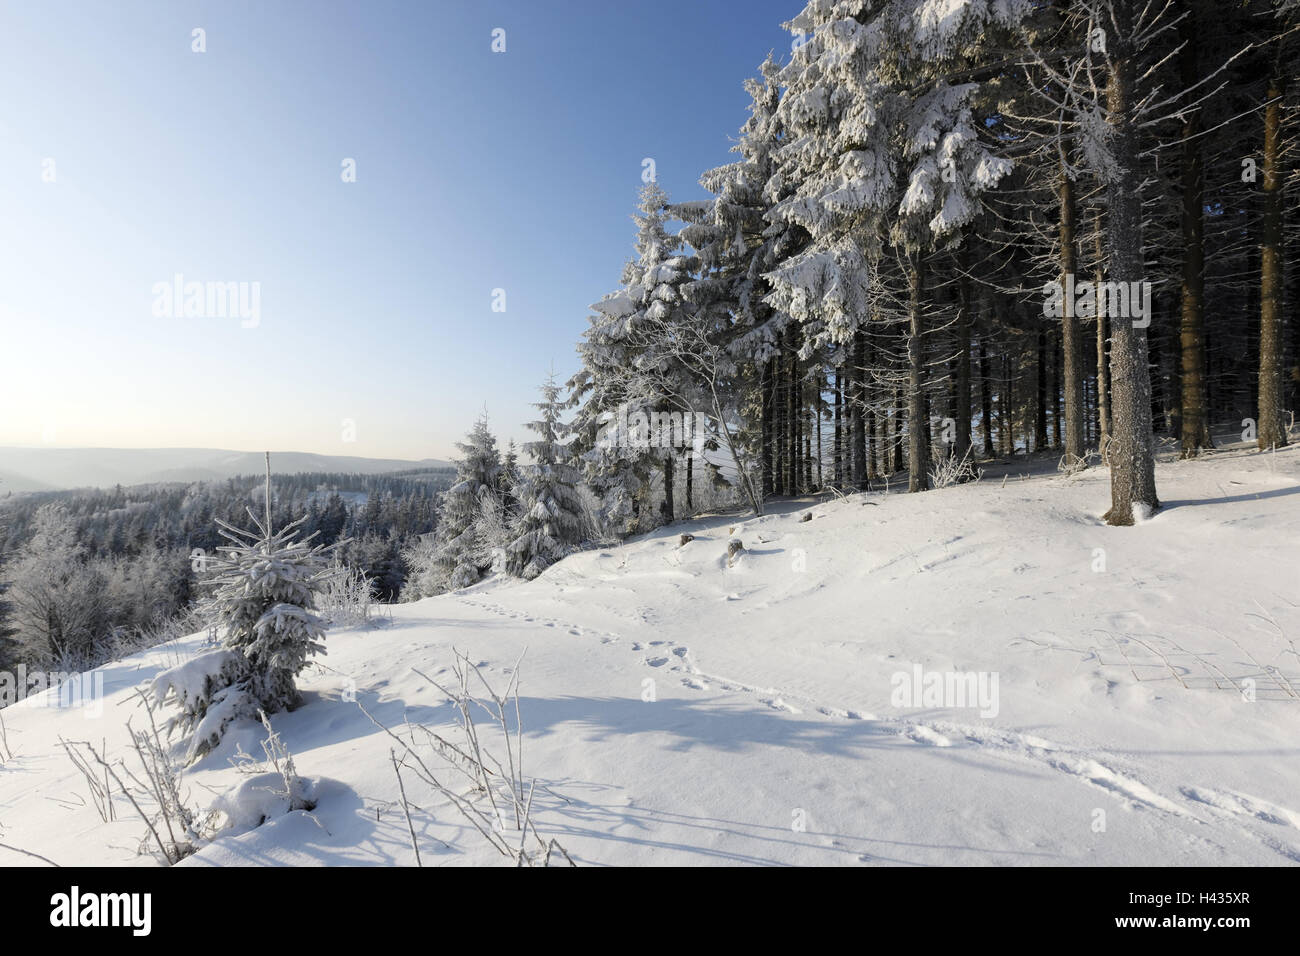 Germany, Thuringia, Thuringian wood, Kickelhahn, wood, snow-covered, place of interest, destination, tourism, scenery, hill, snow, season, winter, trees, nature, sunny, mountain, heaven, blue, cloudless, tracks, coniferous forest, conifers, spruces, Stock Photo